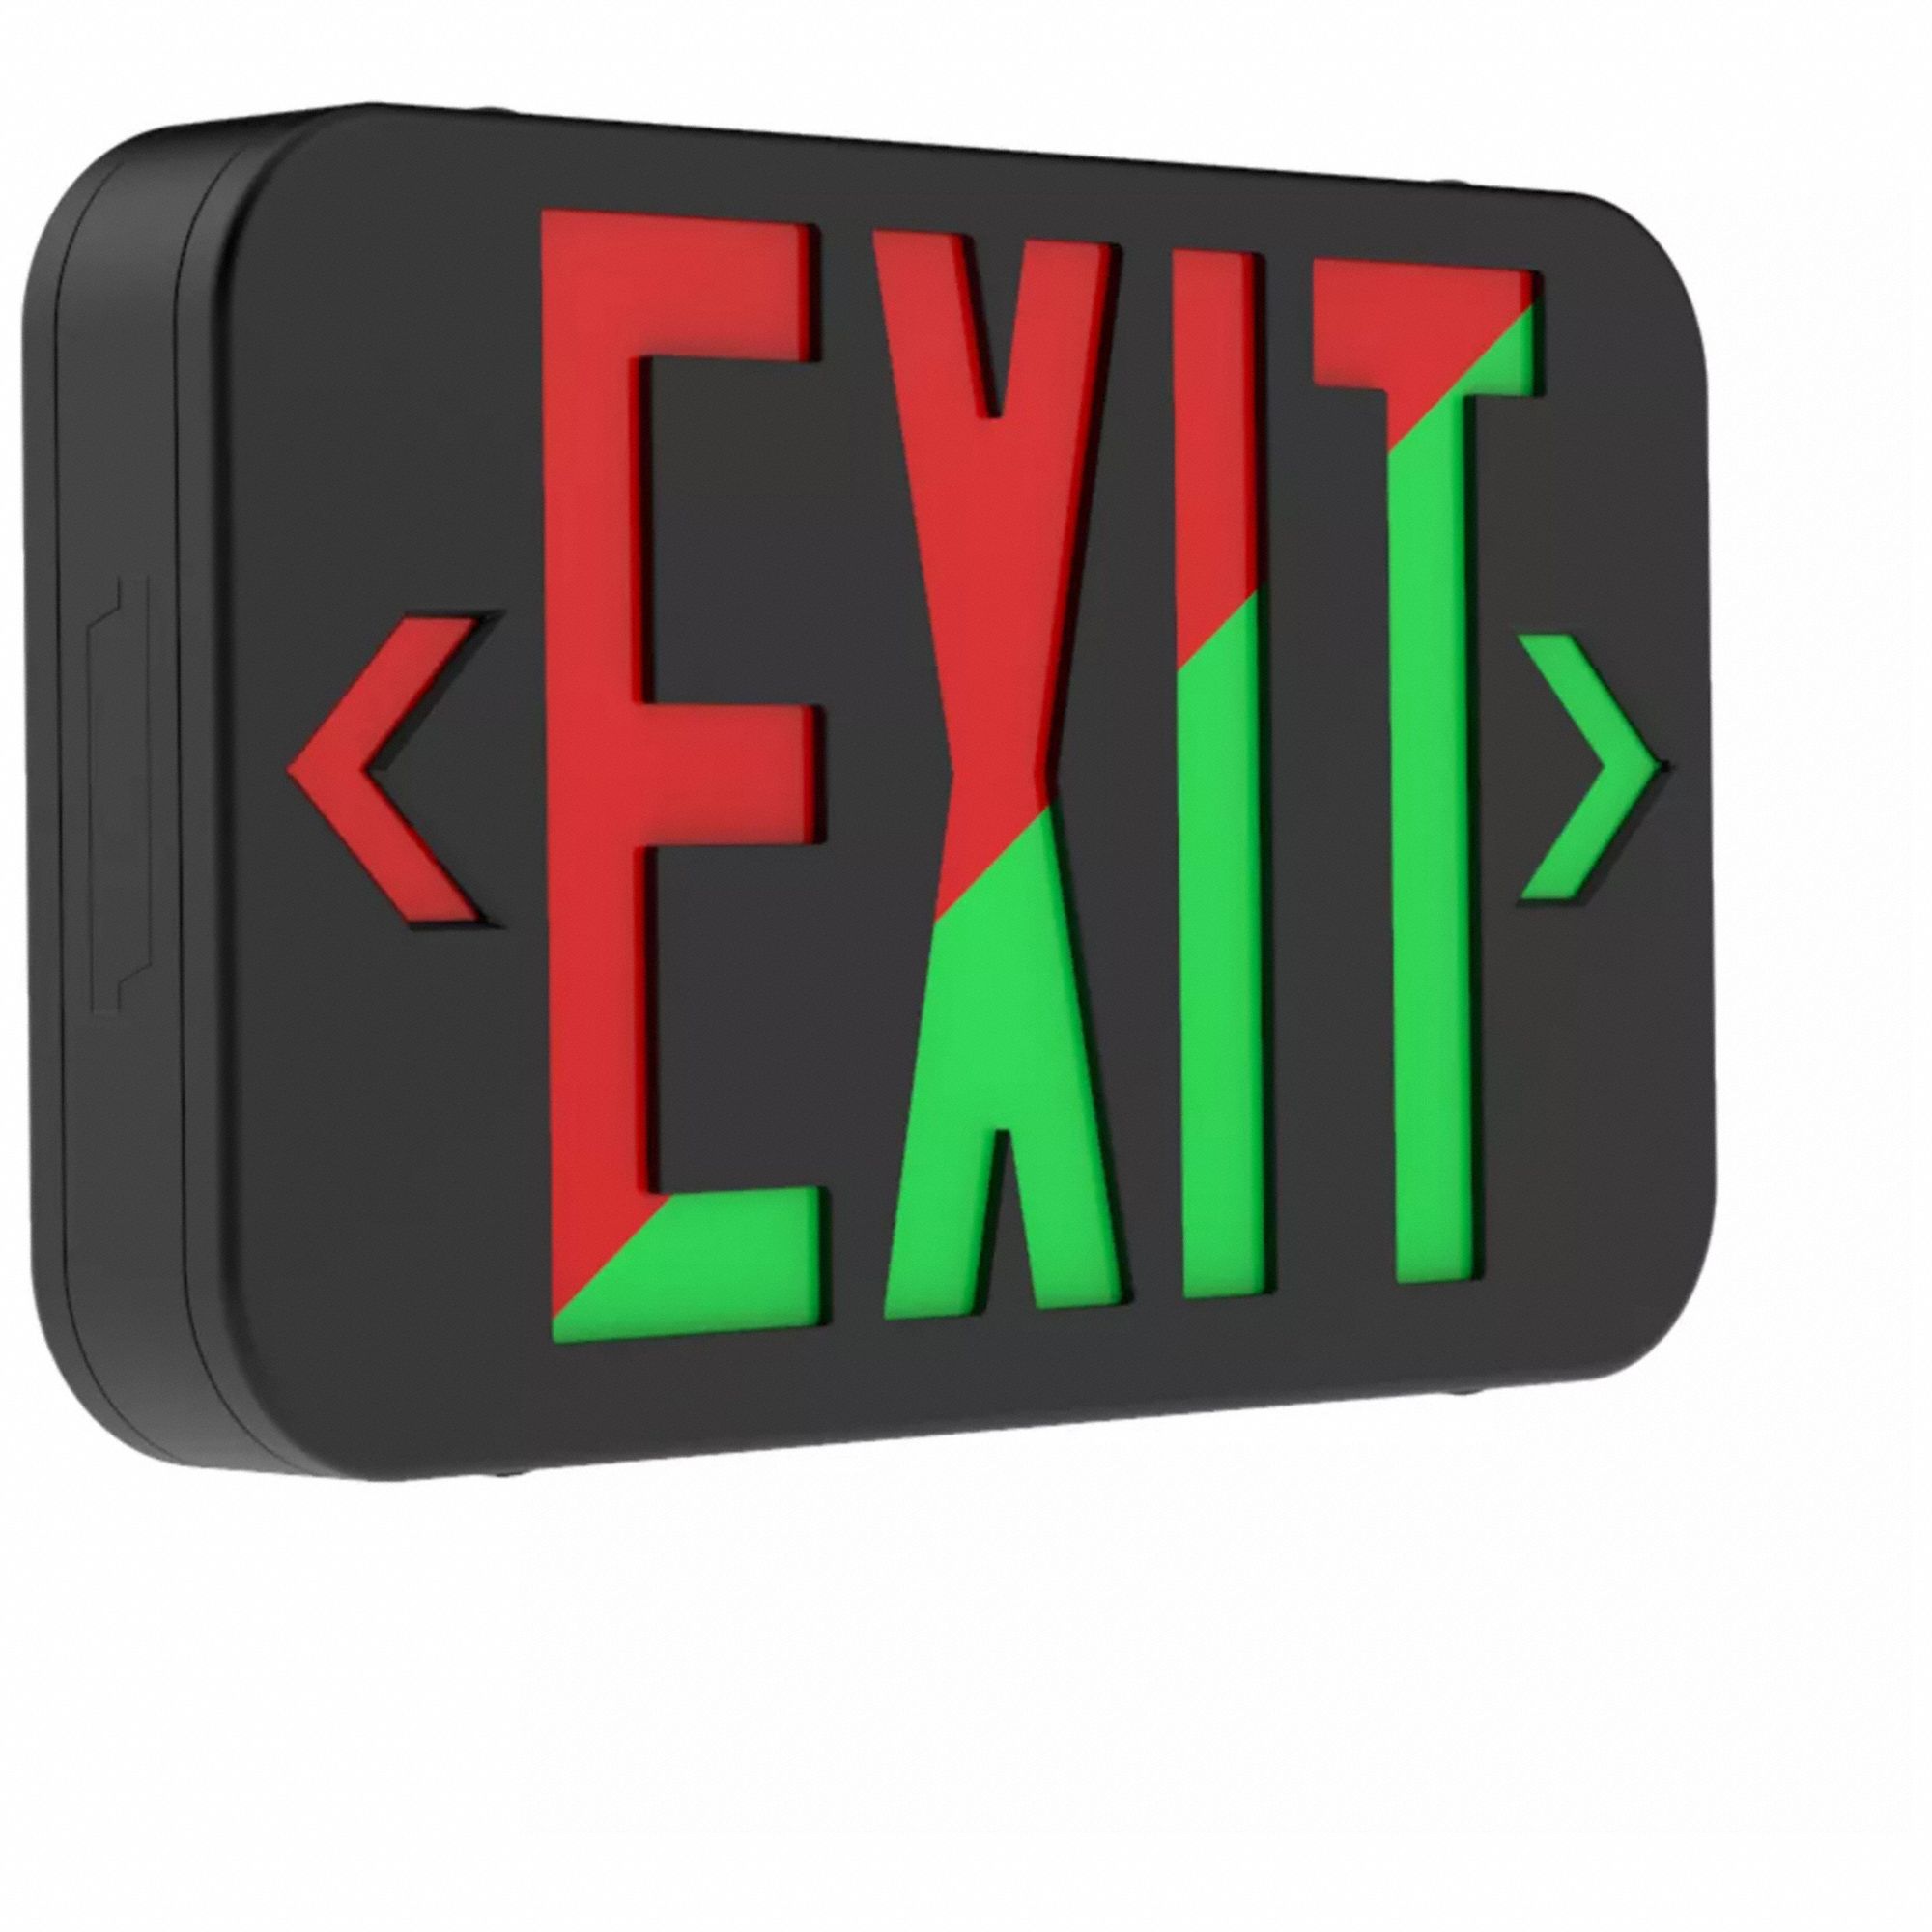 Where Are Lighted Exit Signs Required